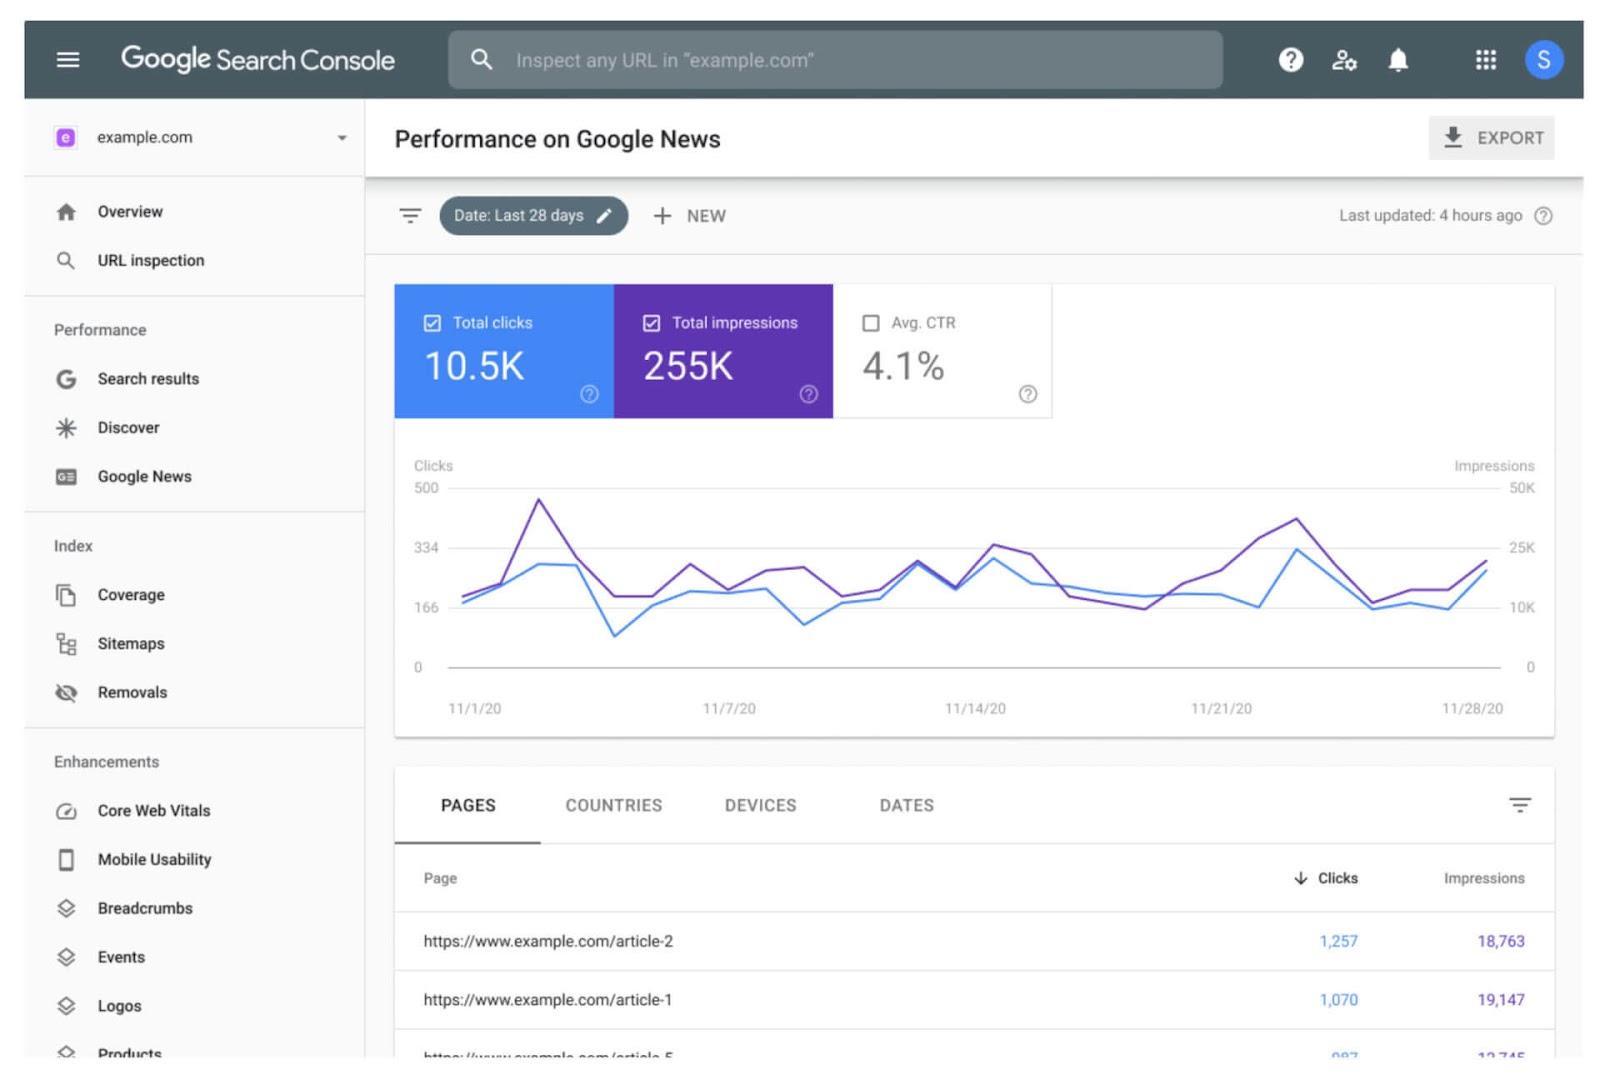 "Performance on Google News" dashboard in Google Search Console